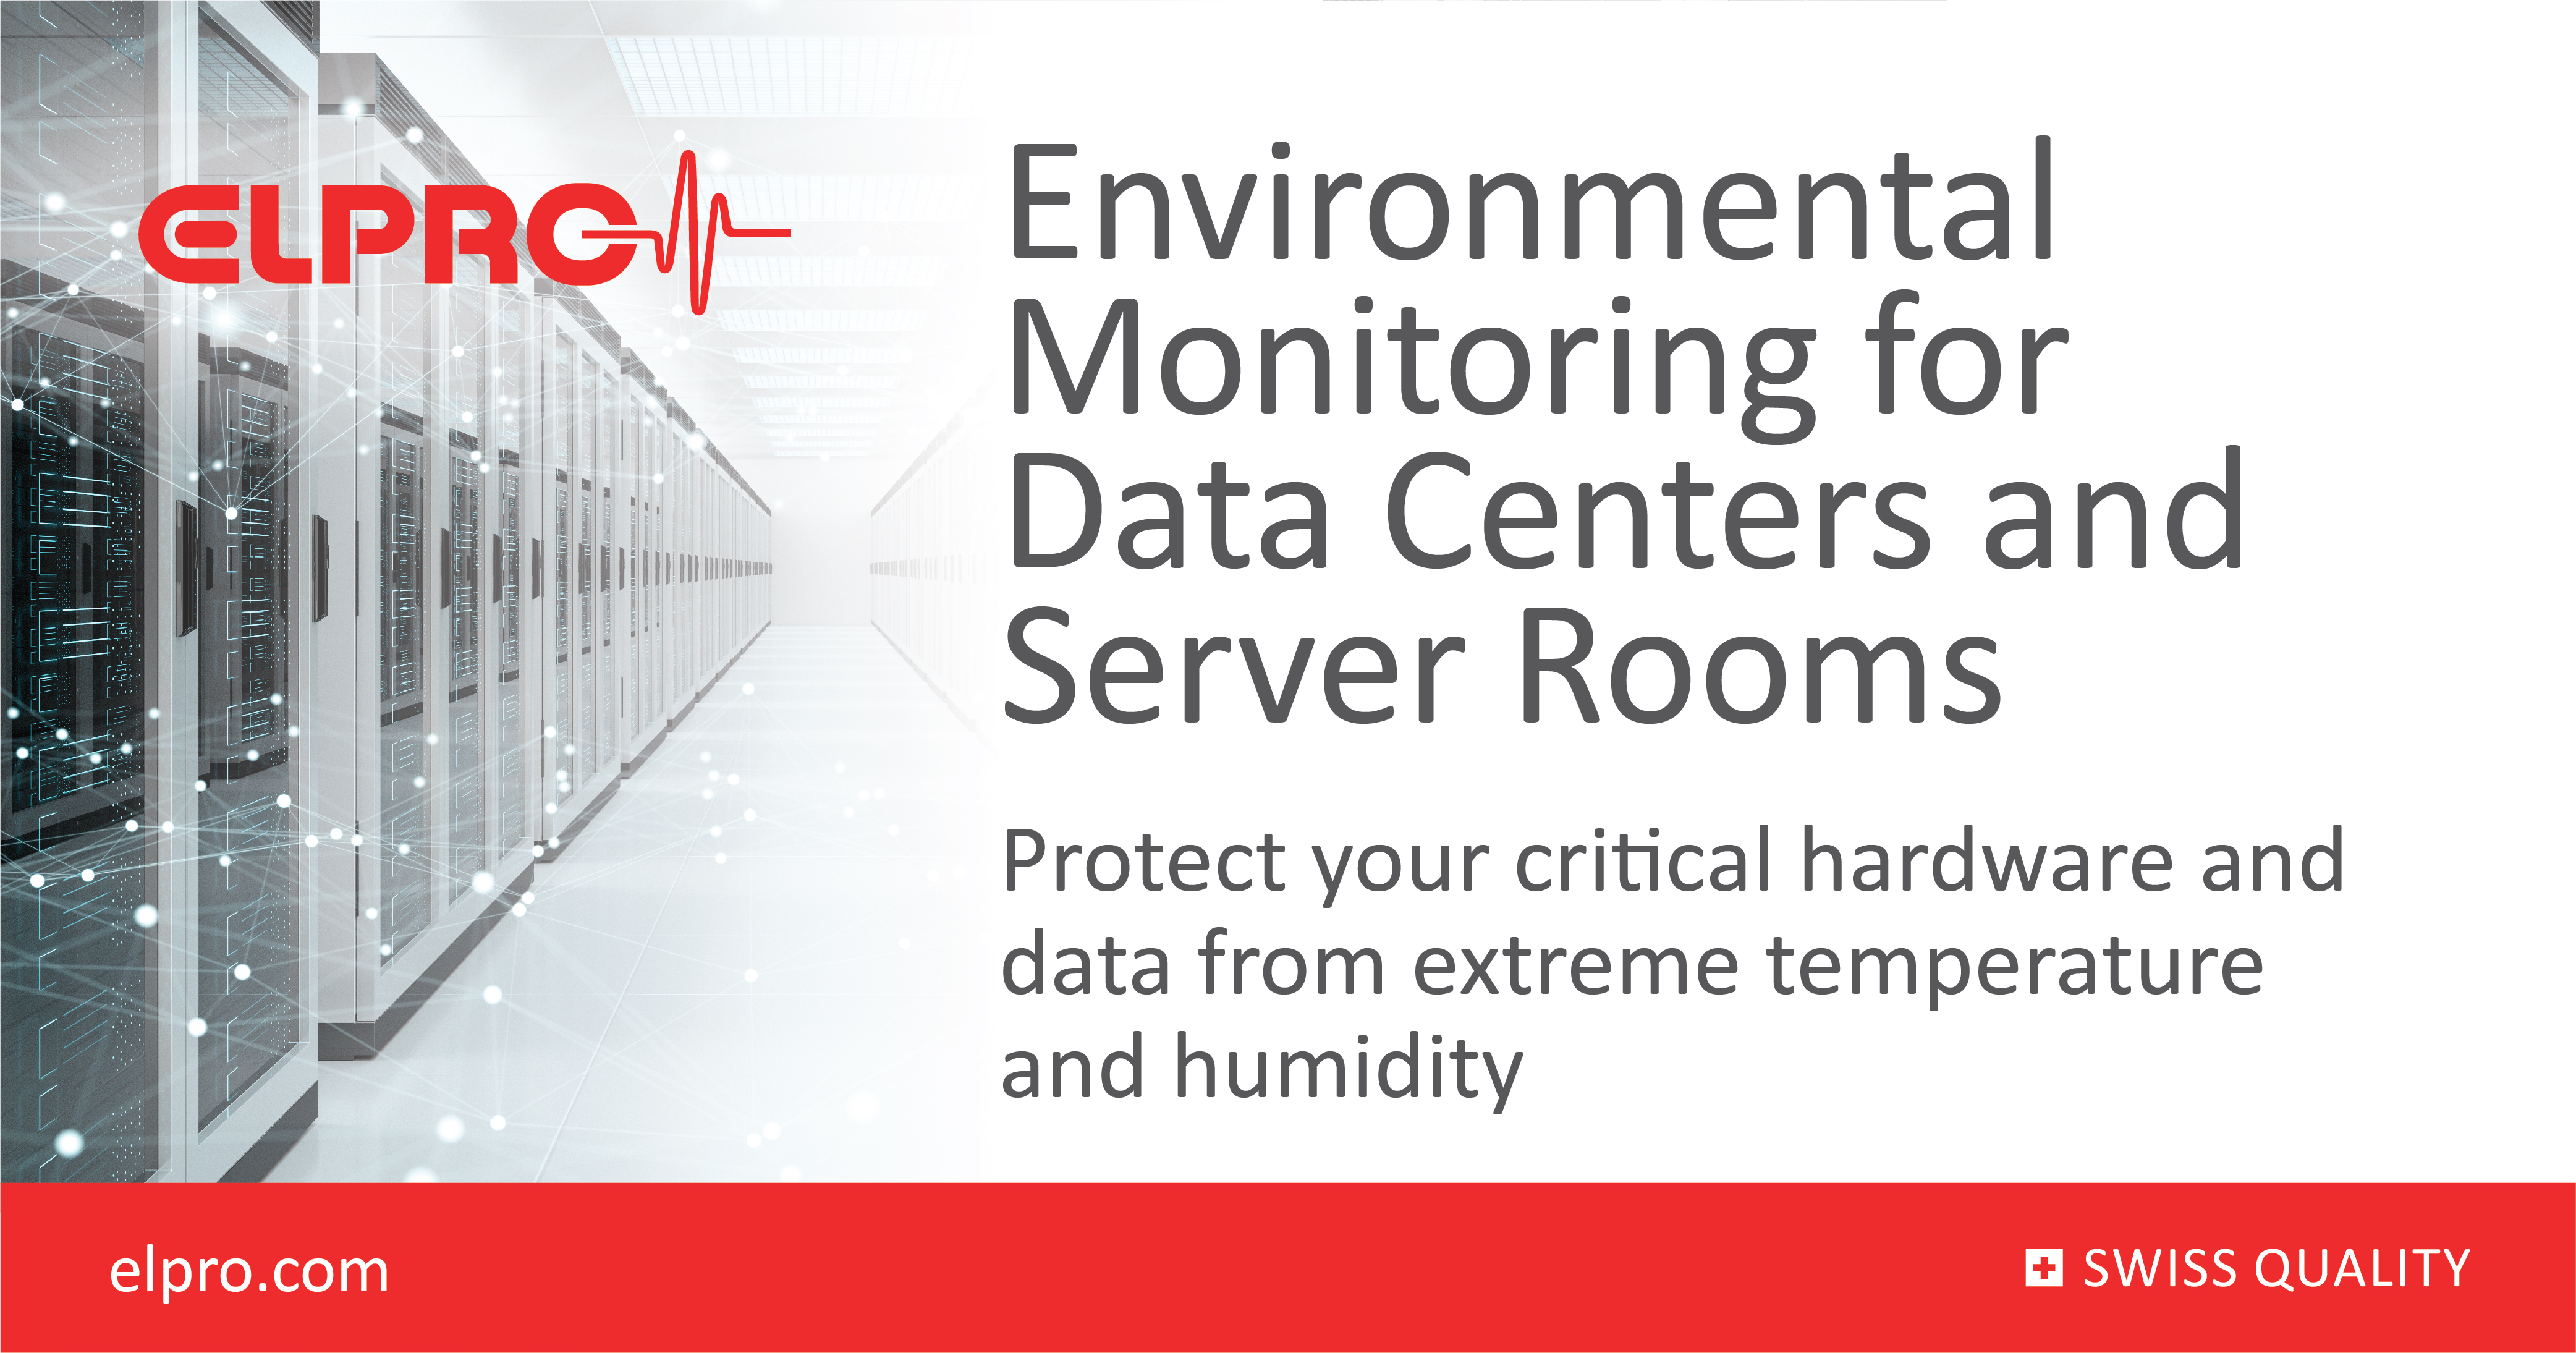 Importance of Temperature Monitoring for Server Rooms